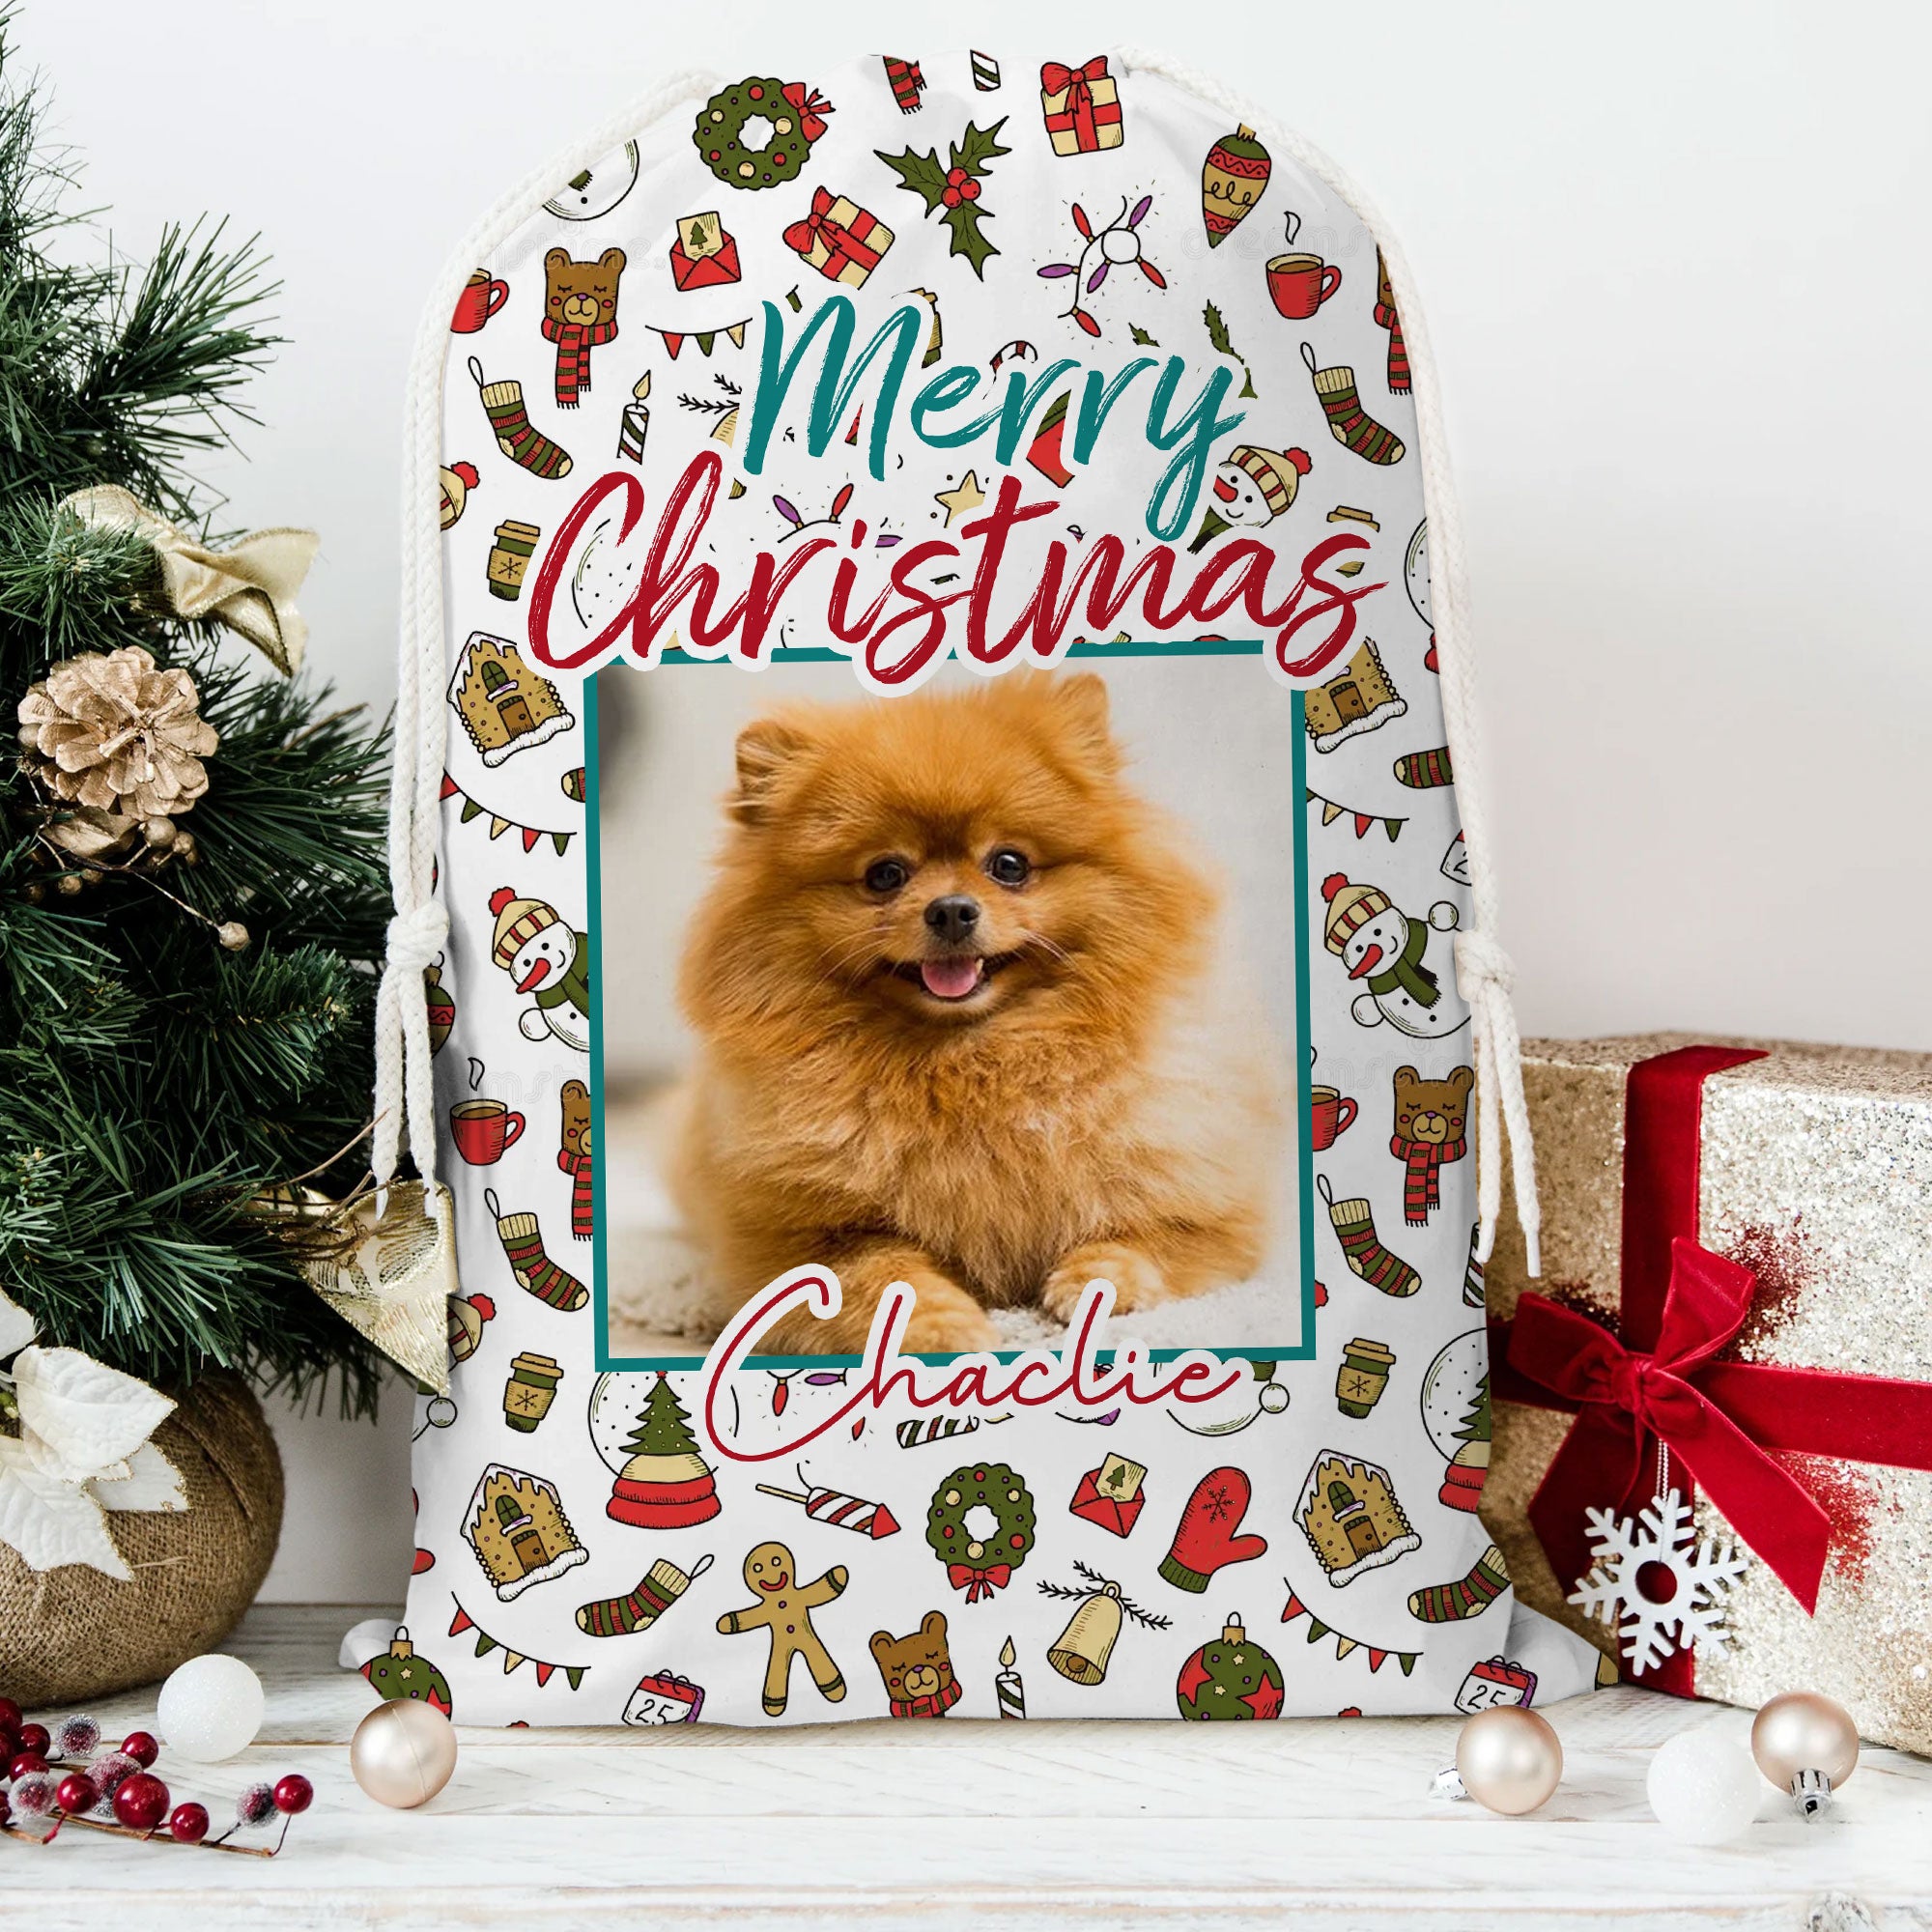 Merry Christmas Decor Pet Photo - Personalized String Bag, Gift For Family, Christmas Gift